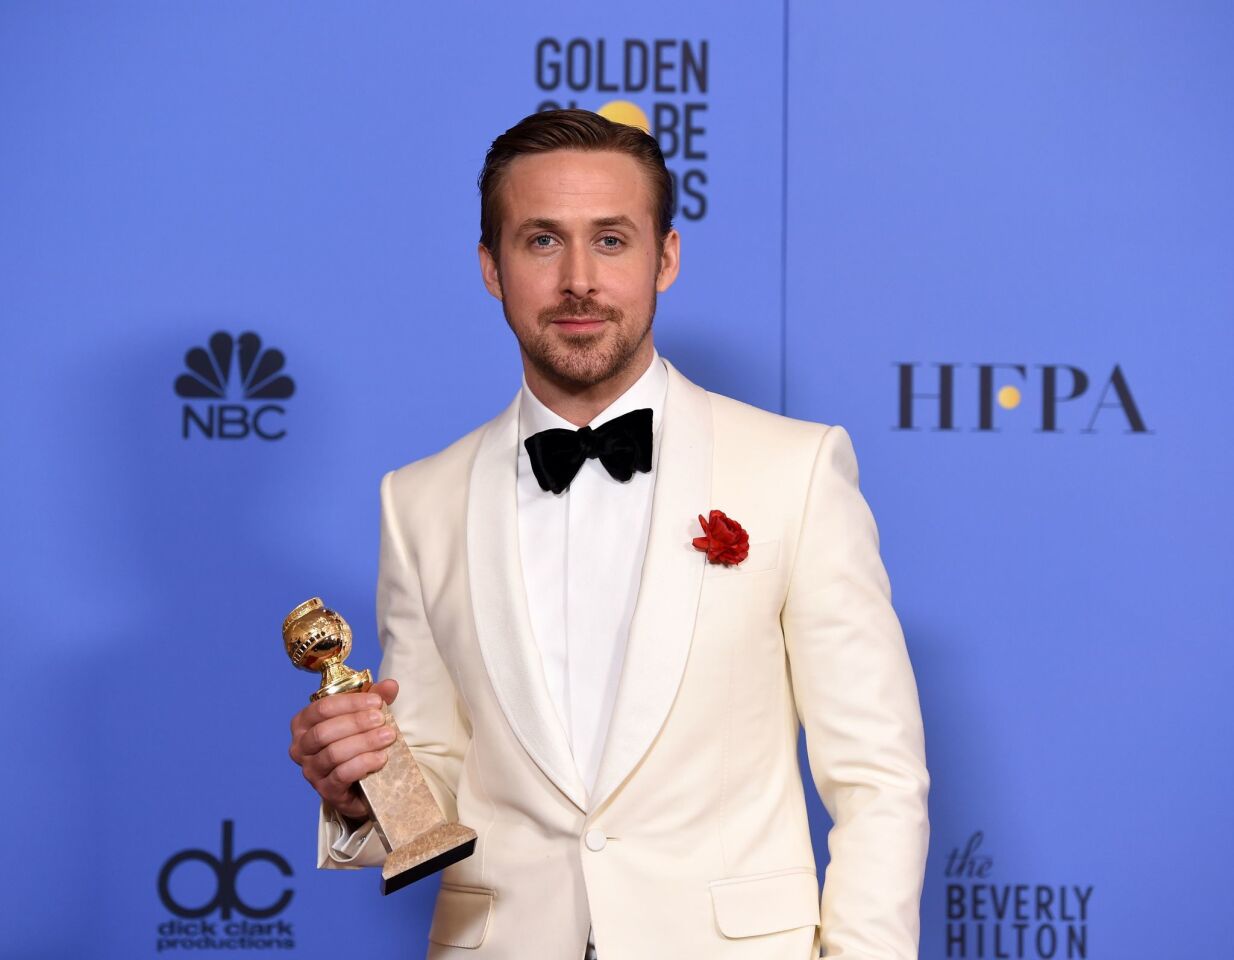 Ryan Gosling with his award for actor in a musical or comedy for his role in "La La Land."